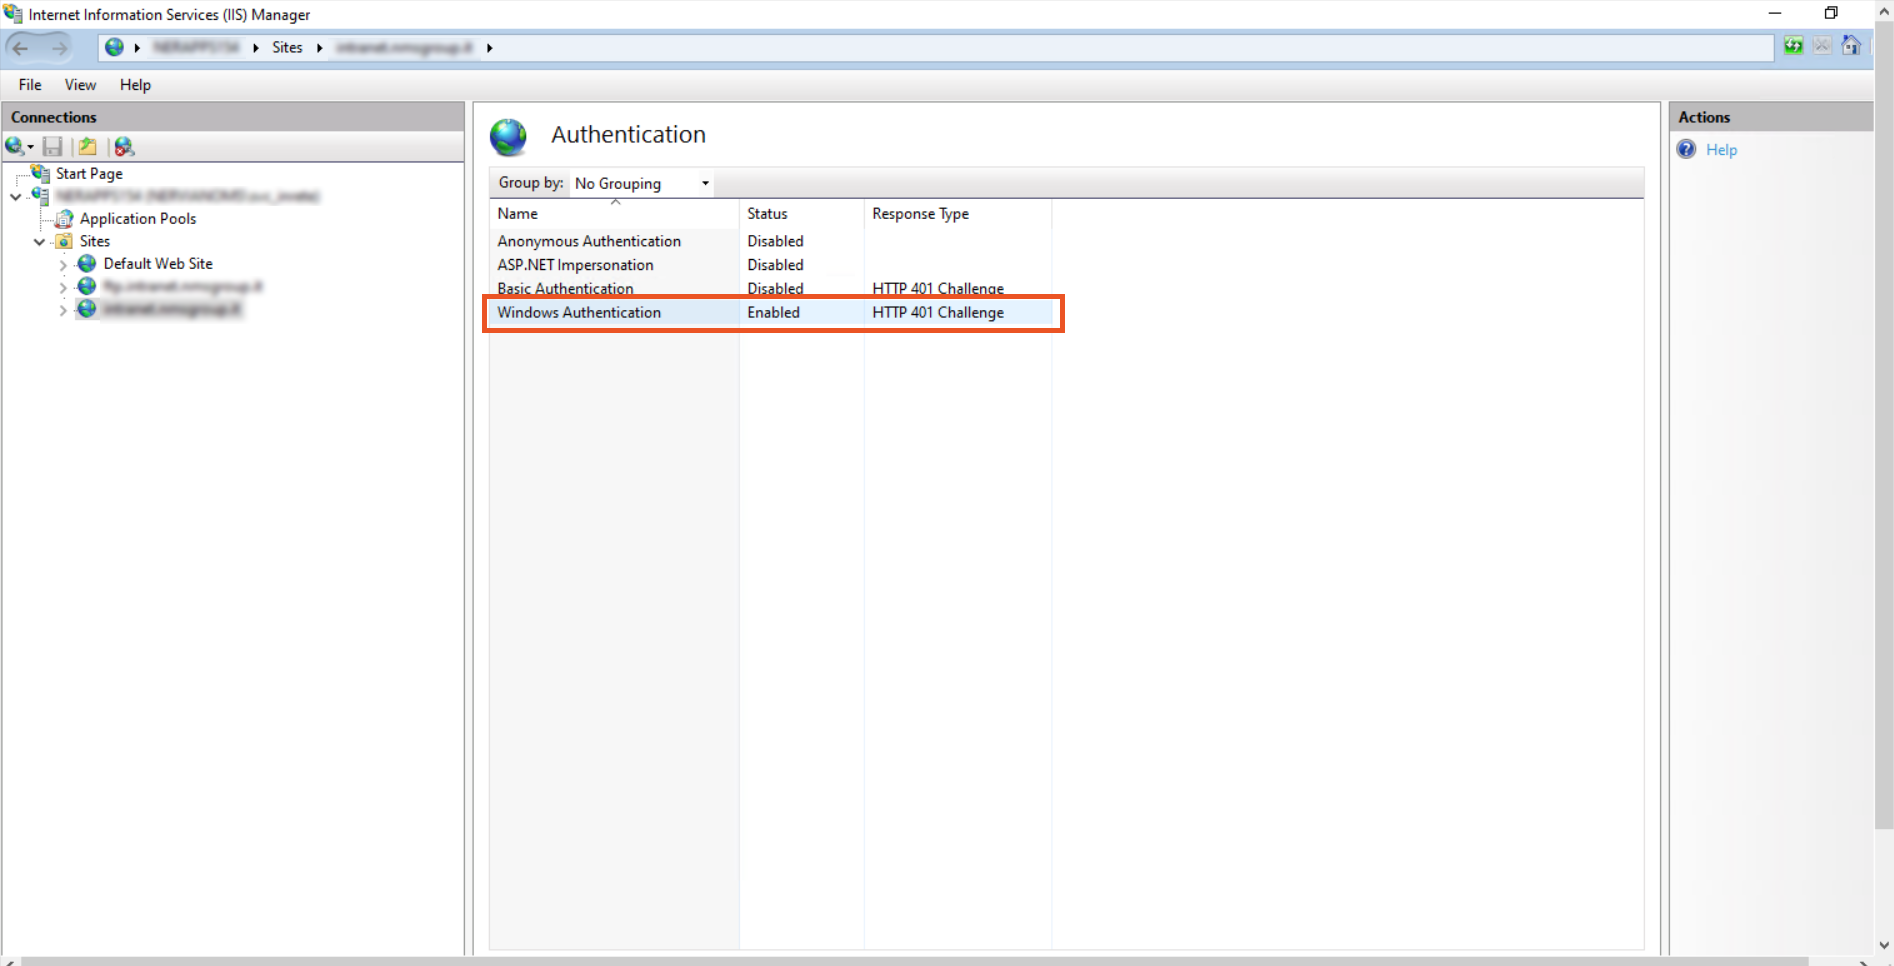 Enable Windows Authentication from Windows IIS manager for Kerberos SSO on the configured application